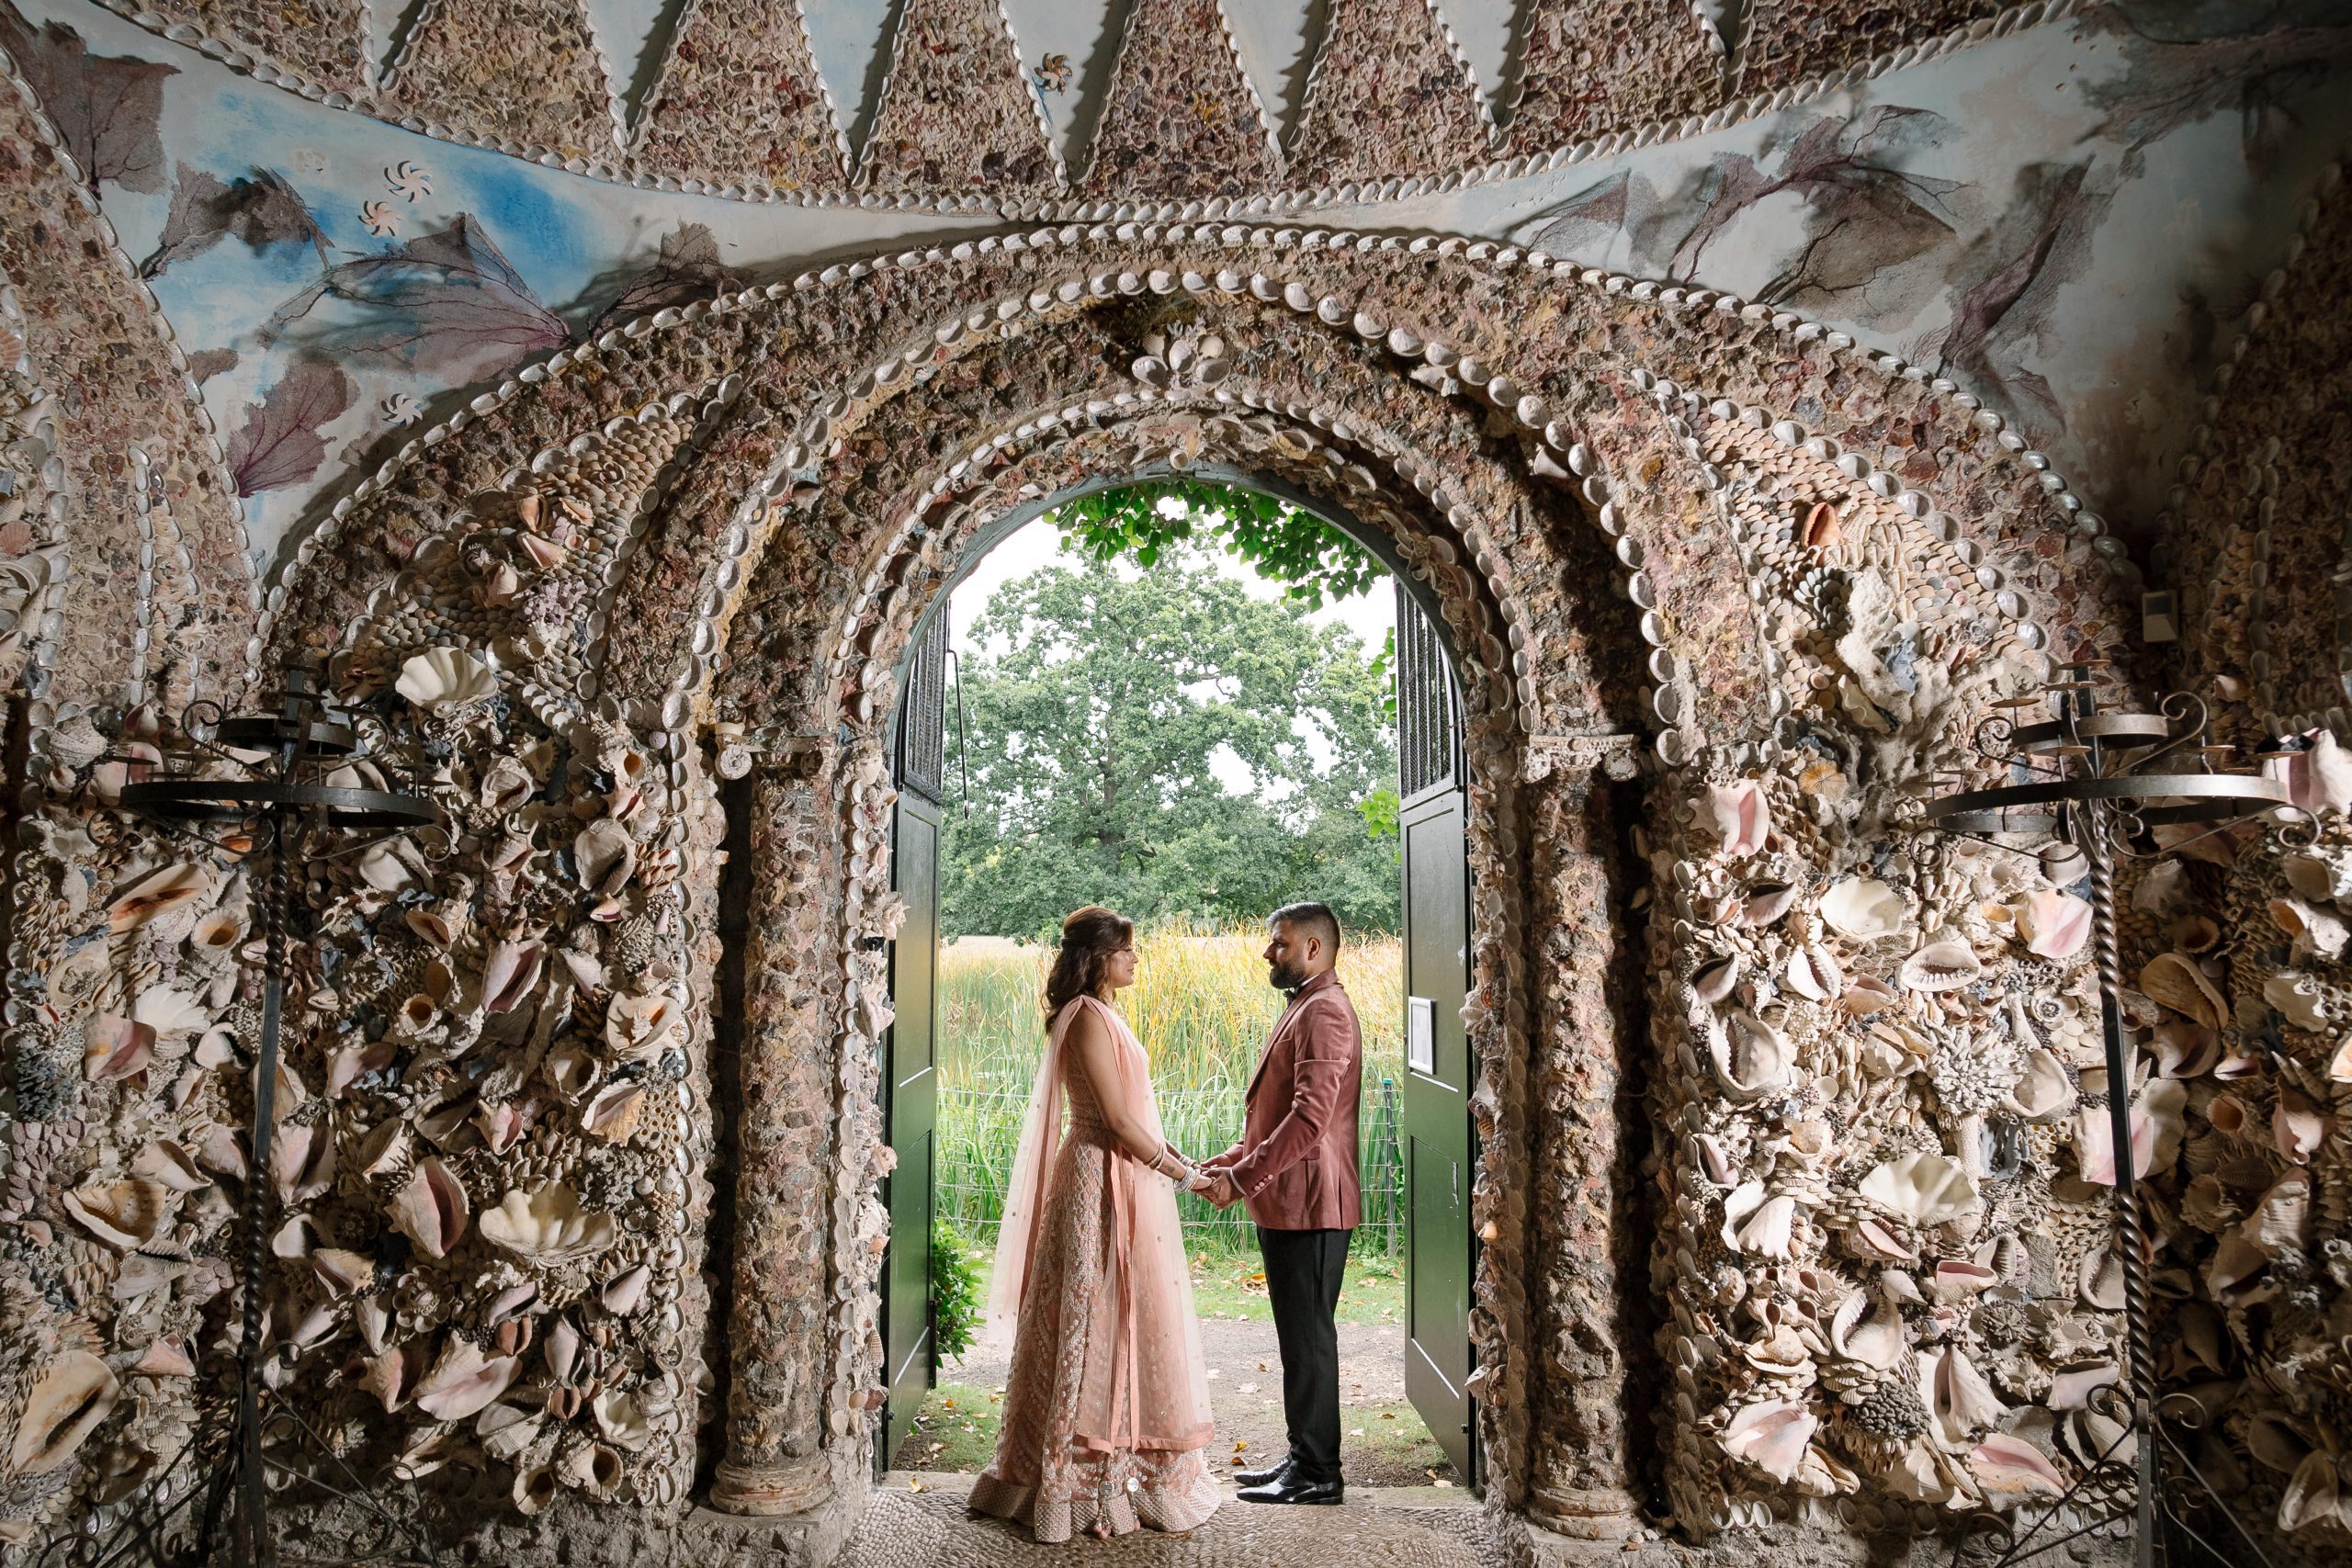 Couple in shell grotto